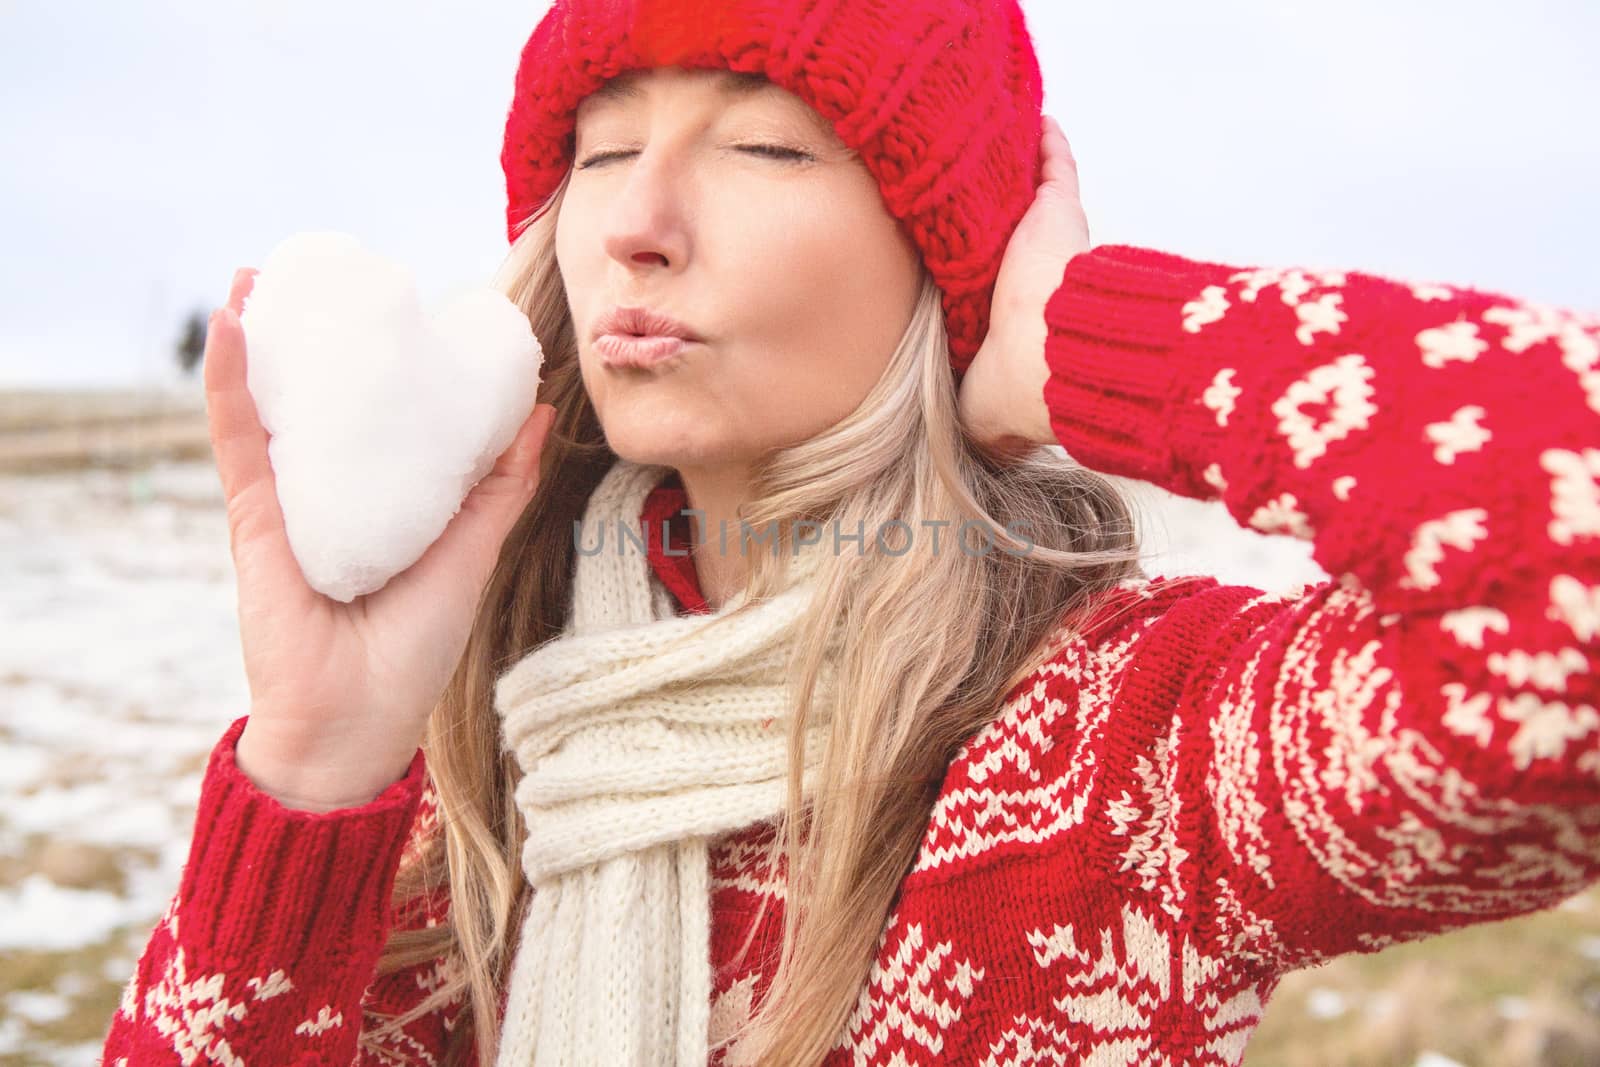 A female holds a snow ball in the shape of a heart and blowing kisses